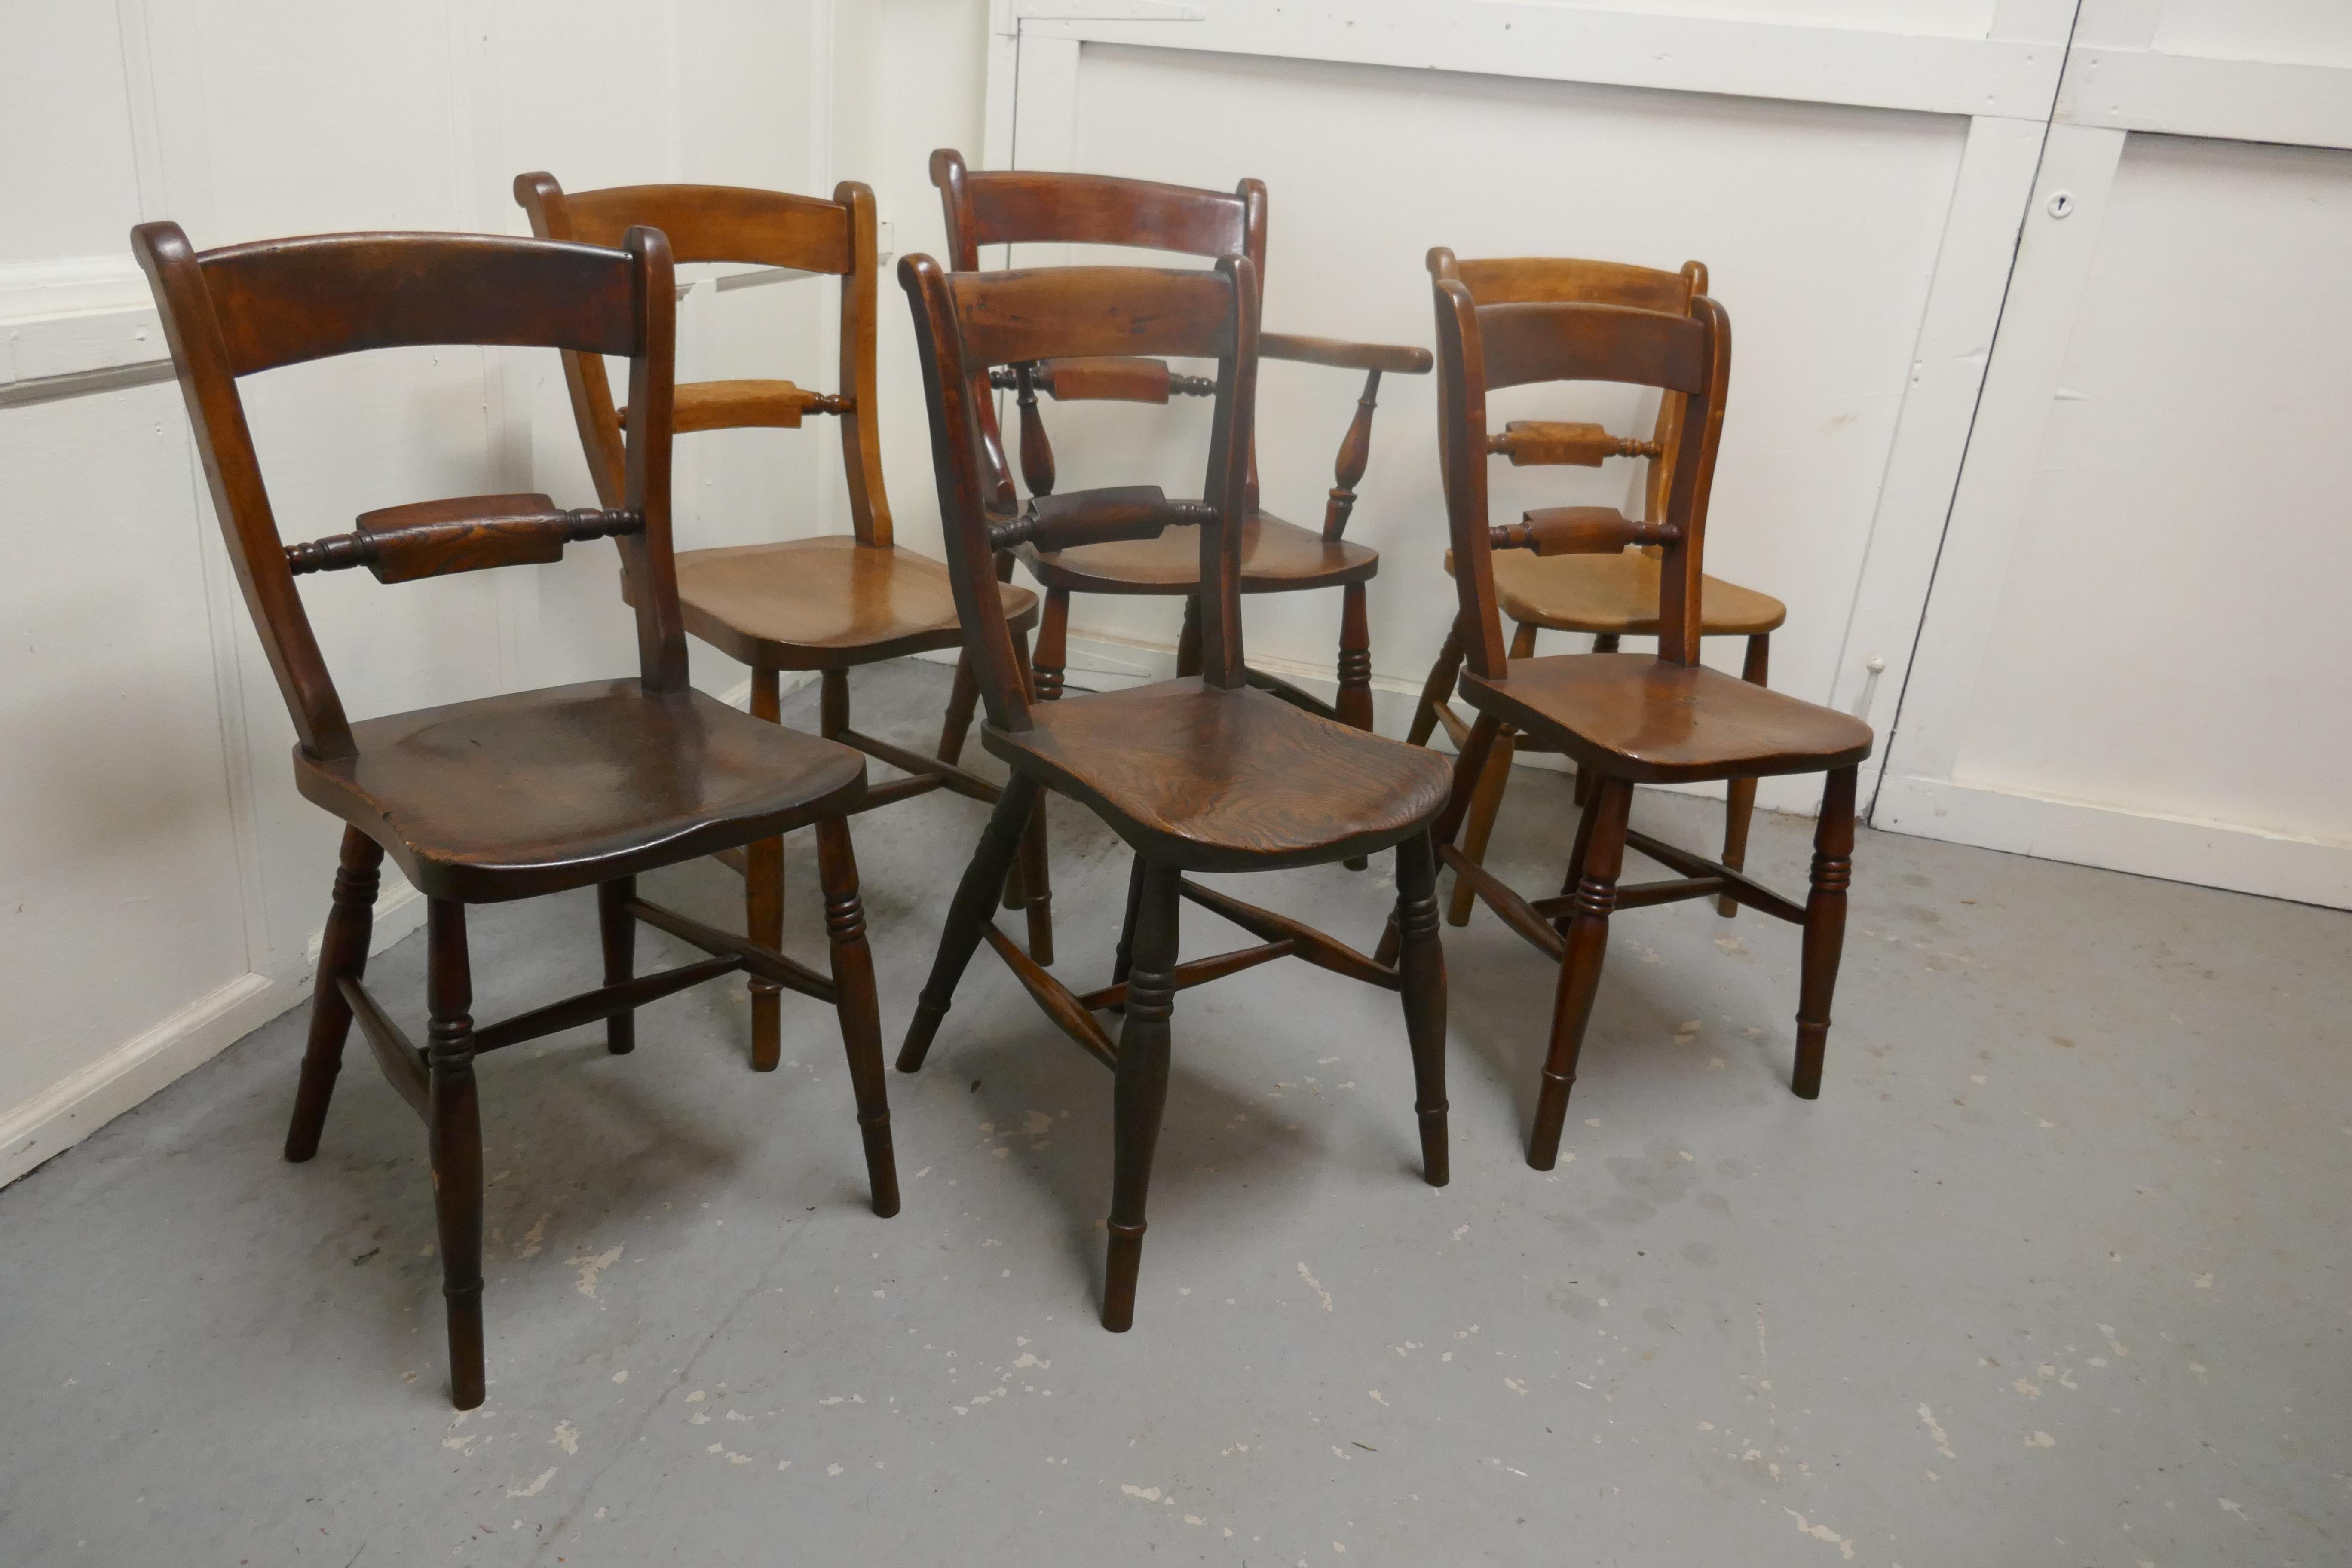 A Harlequin set of 6 Victorian beech and elm rope back kitchen chairs

The chairs are all the same style though there are some differences in the detail of the turnings, there are 5 single chairs and one carver chair
 This is a good set of